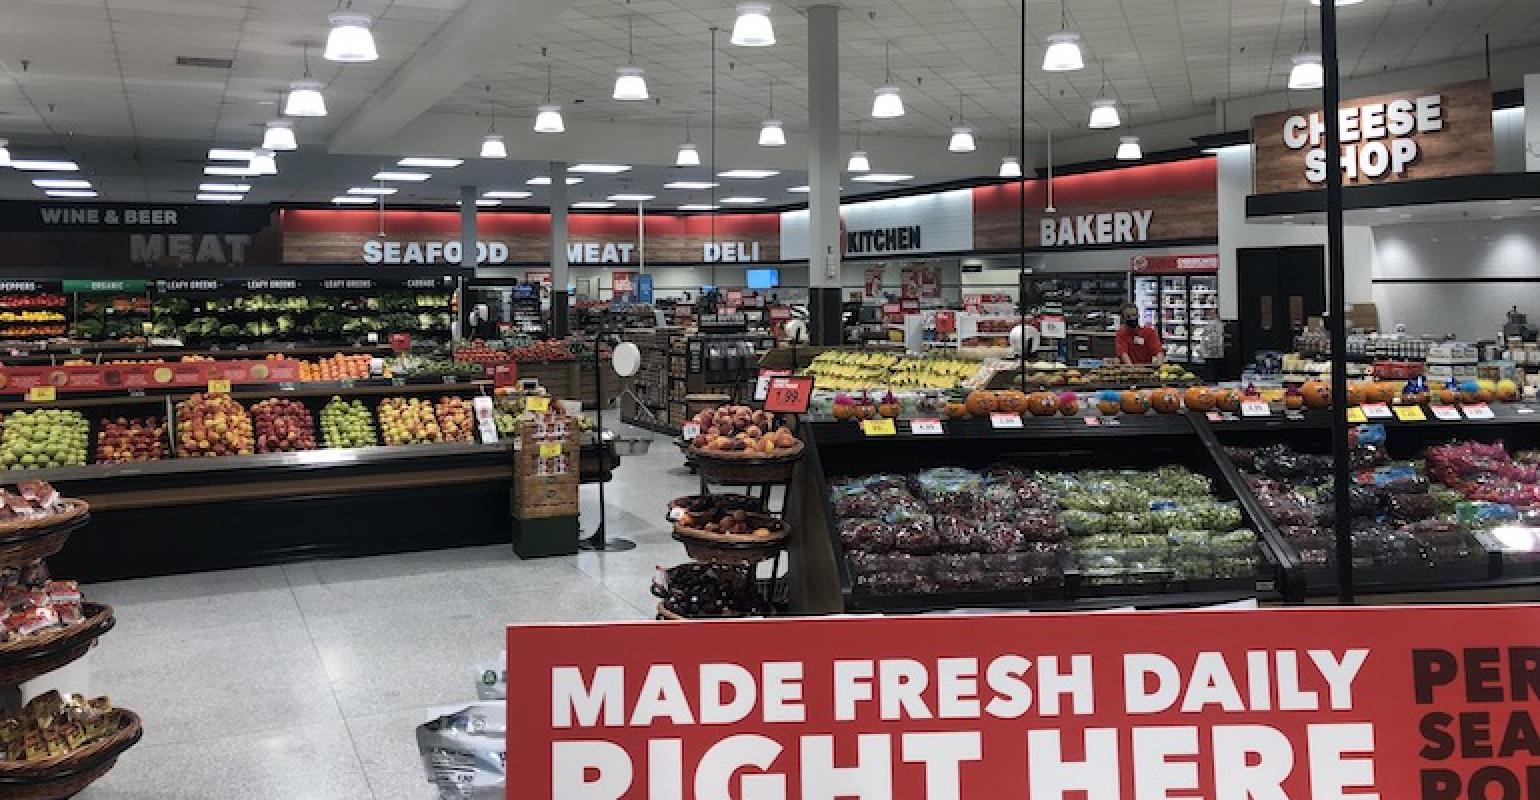 Schnucks to debut remodeled store with food hall Supermarket News